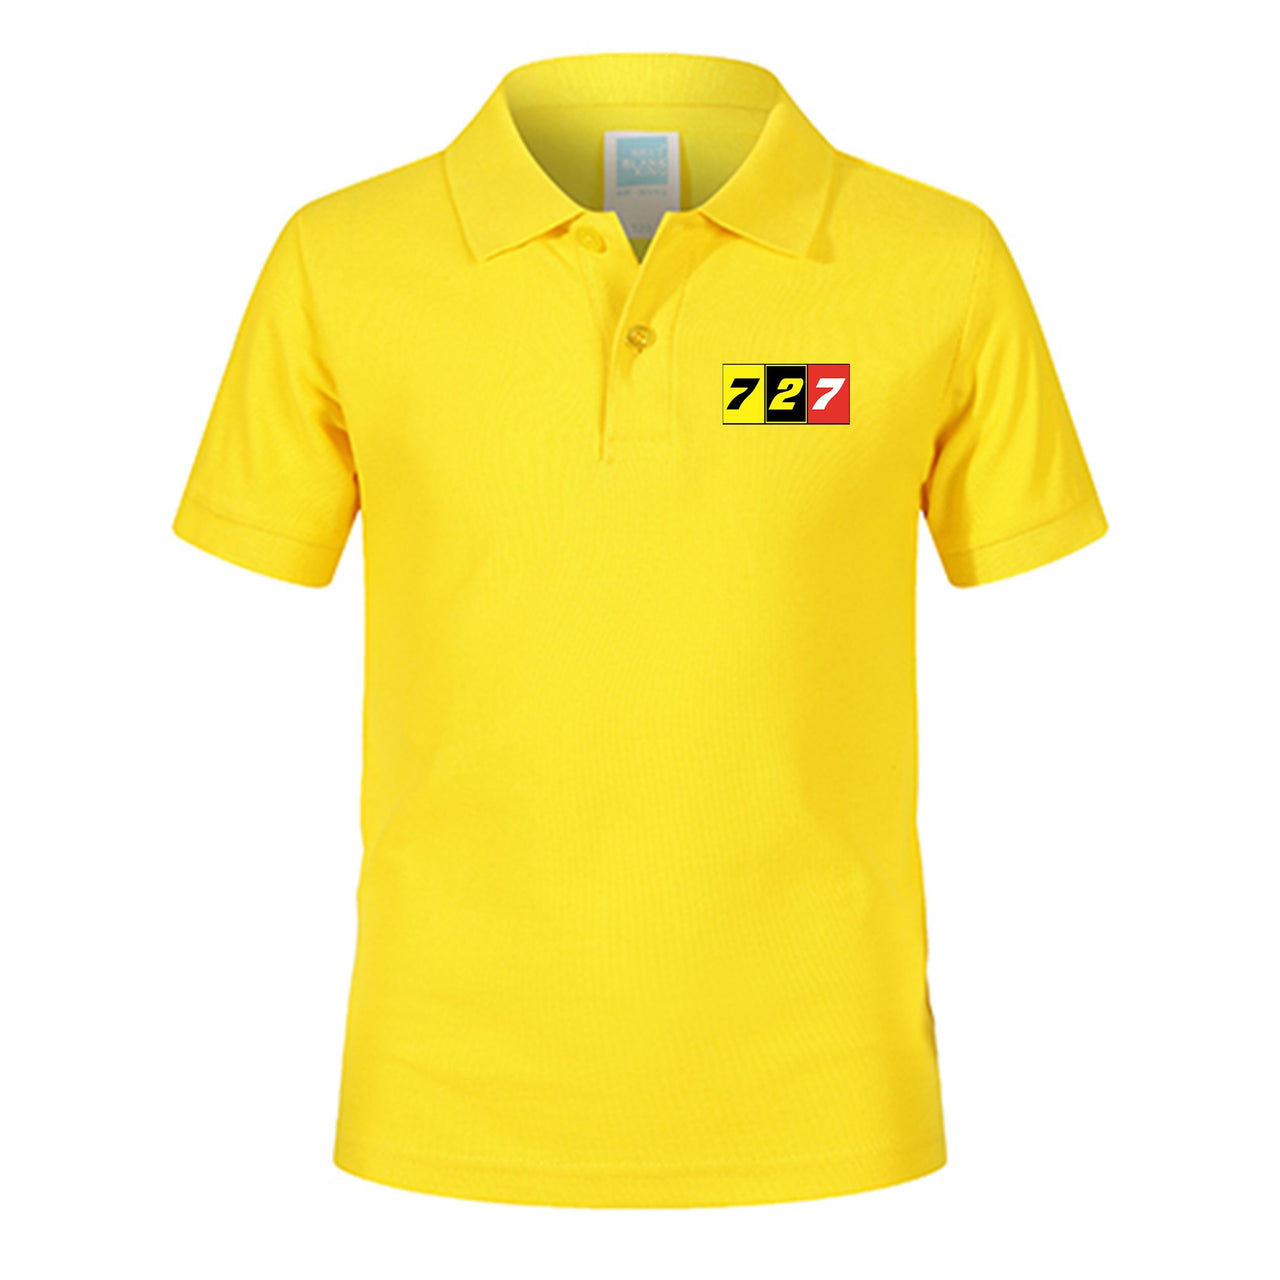 Flat Colourful 727 Designed Children Polo T-Shirts